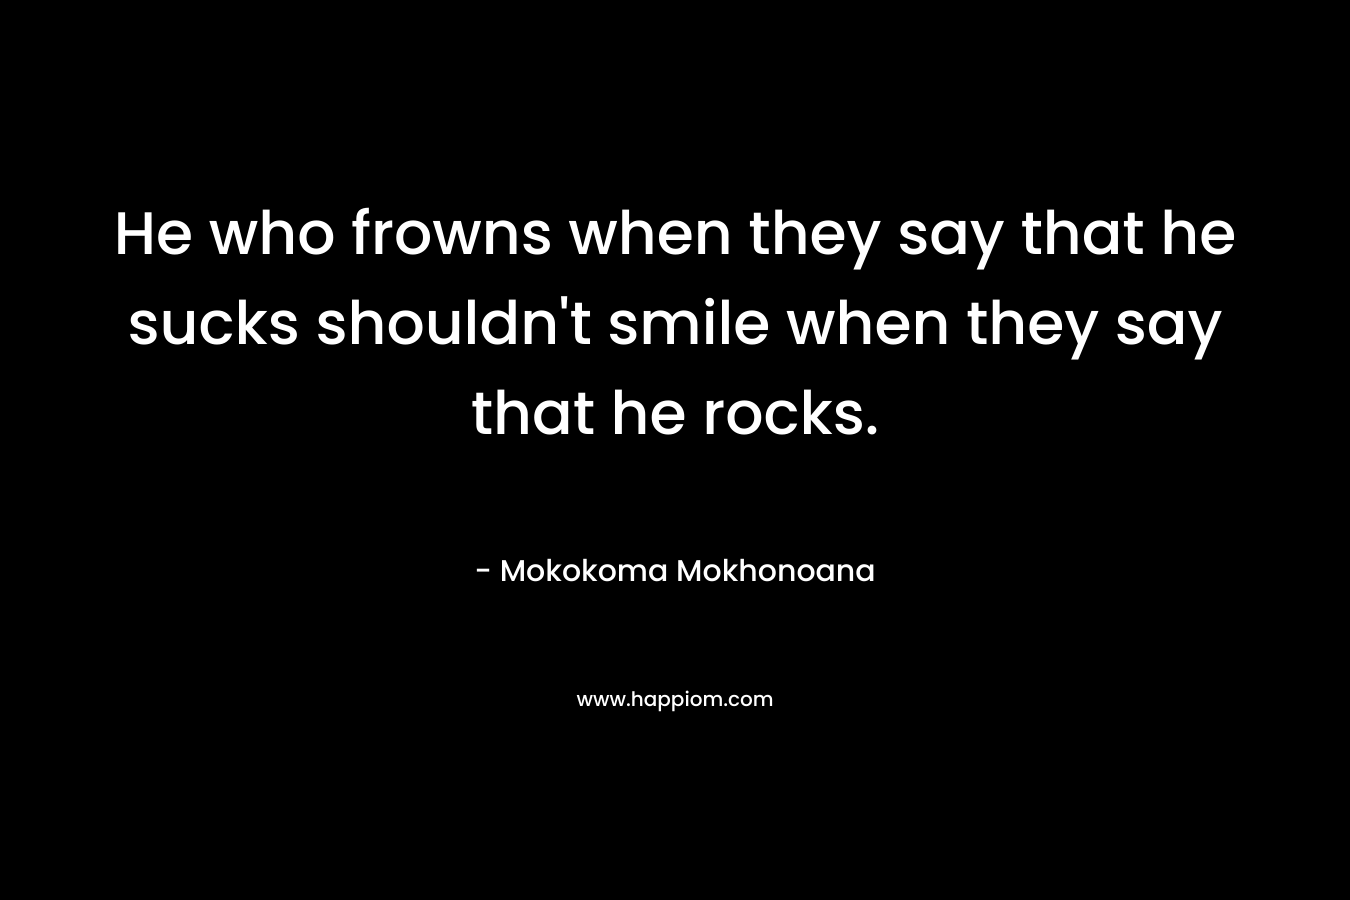 He who frowns when they say that he sucks shouldn’t smile when they say that he rocks. – Mokokoma Mokhonoana